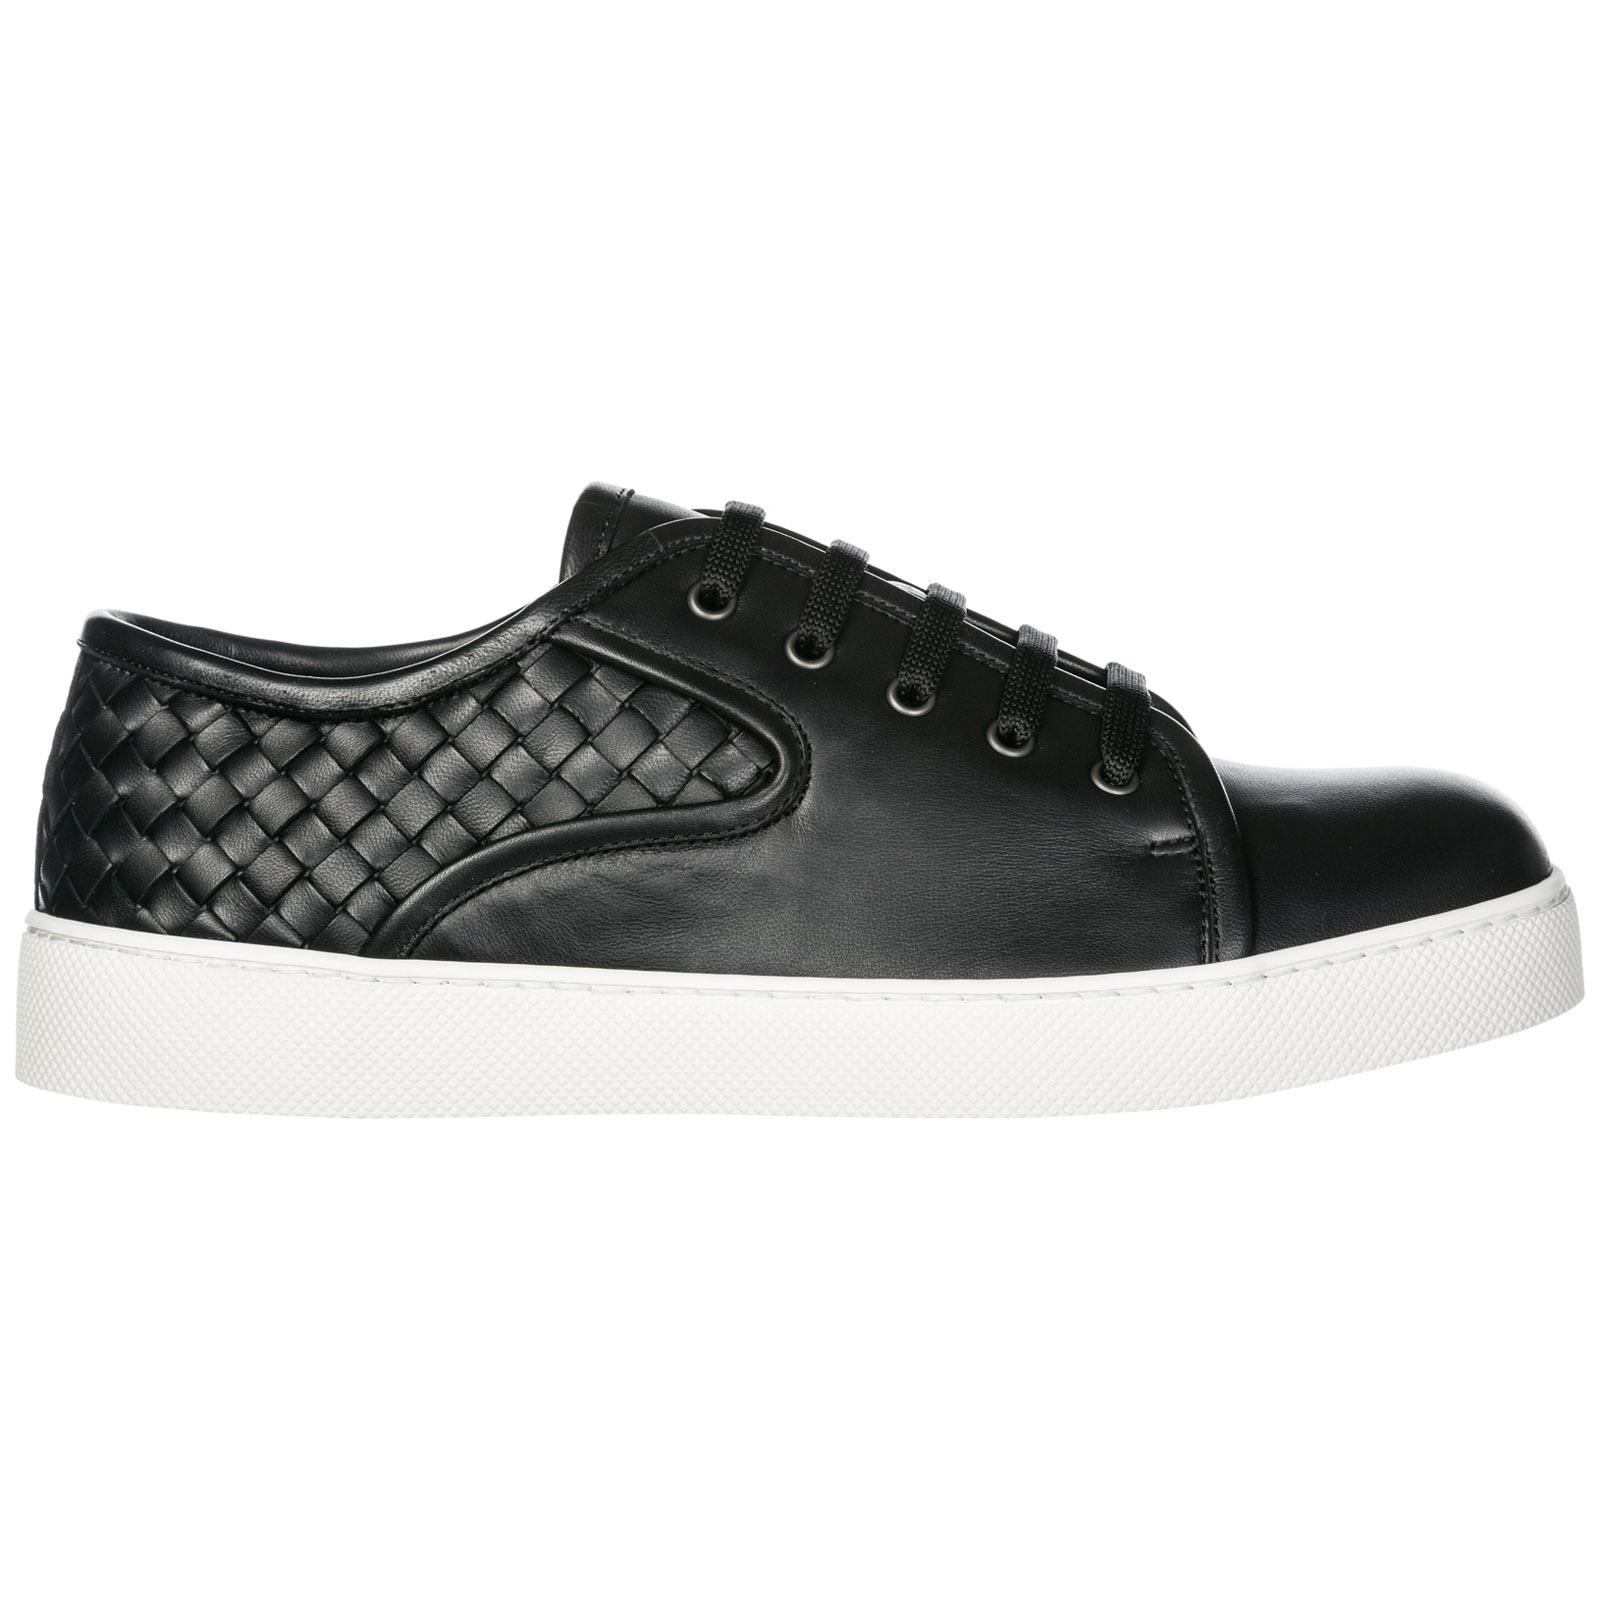 Bottega Men's Shoes Leather Trainers Sneakers